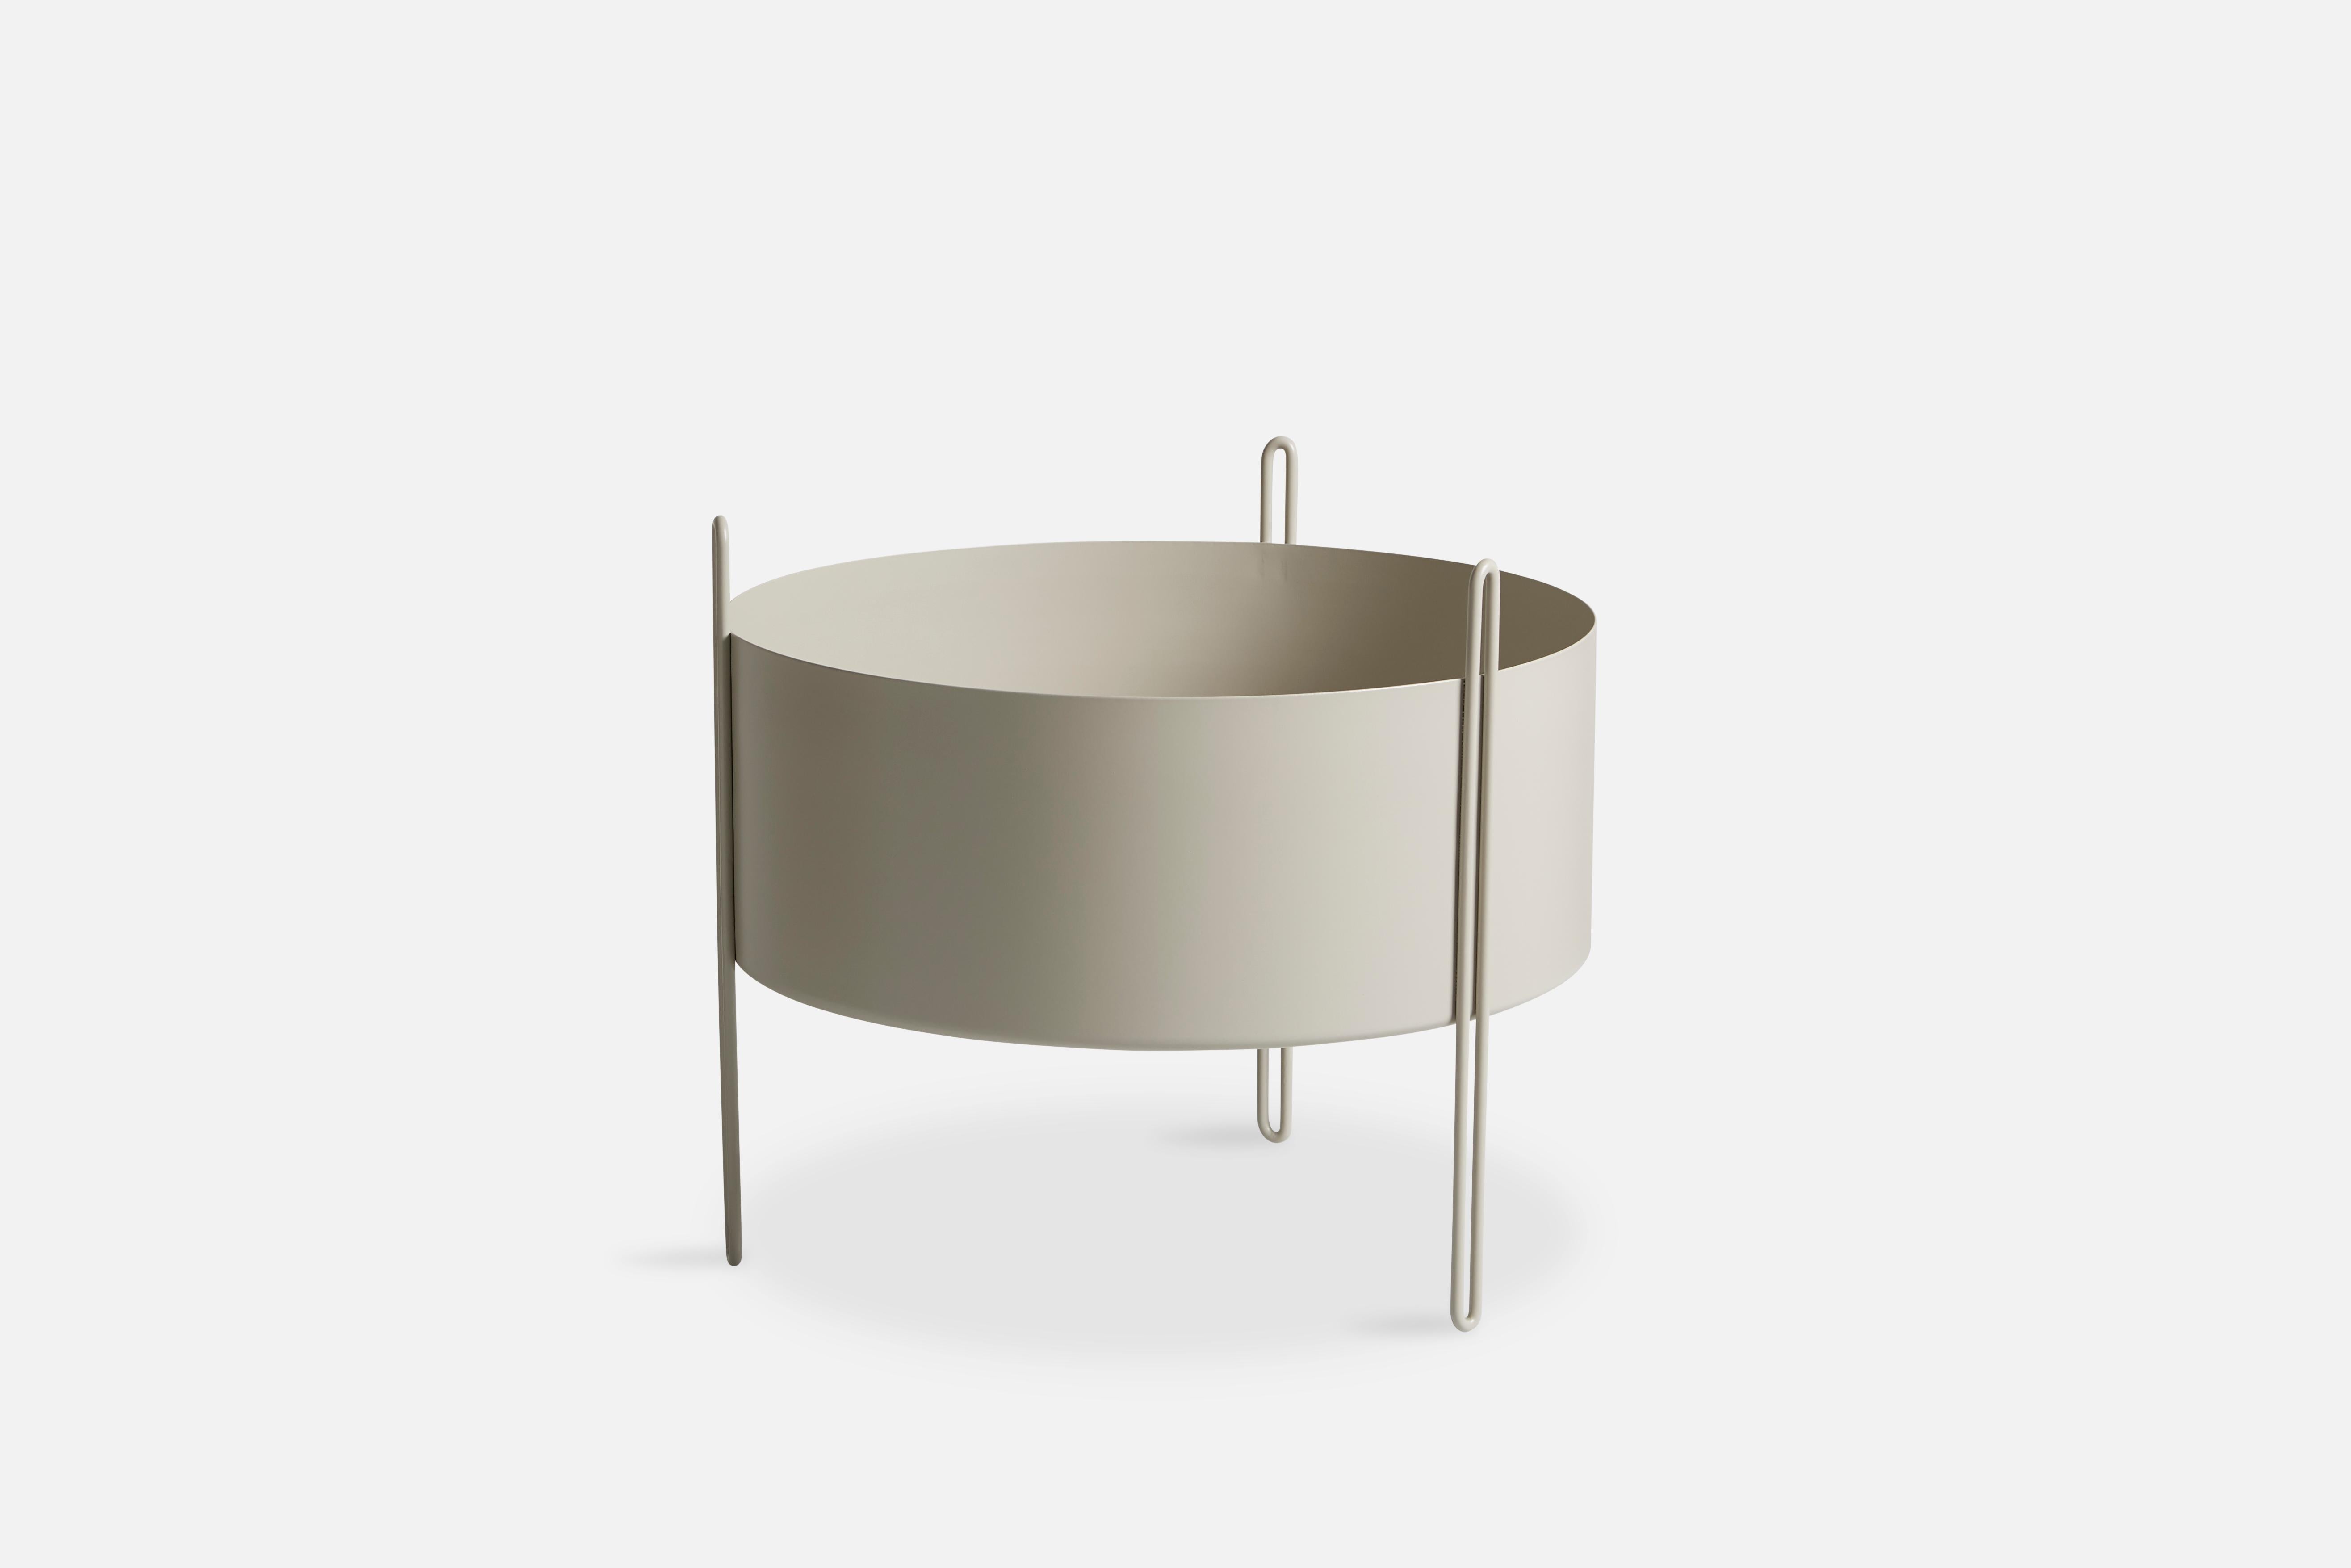 Medium Grey Pidestall planter by Emilie Stahl Carlsen
Materials: Metal.
Dimensions: D 40 x H 35 cm
Available in grey, taupe or black and in 3 sizes: D 15 x H 15, D 40 x H 35, D 40 x H 55 cm.

Emilie Stahl Carlsen is a Nor wegian designer who